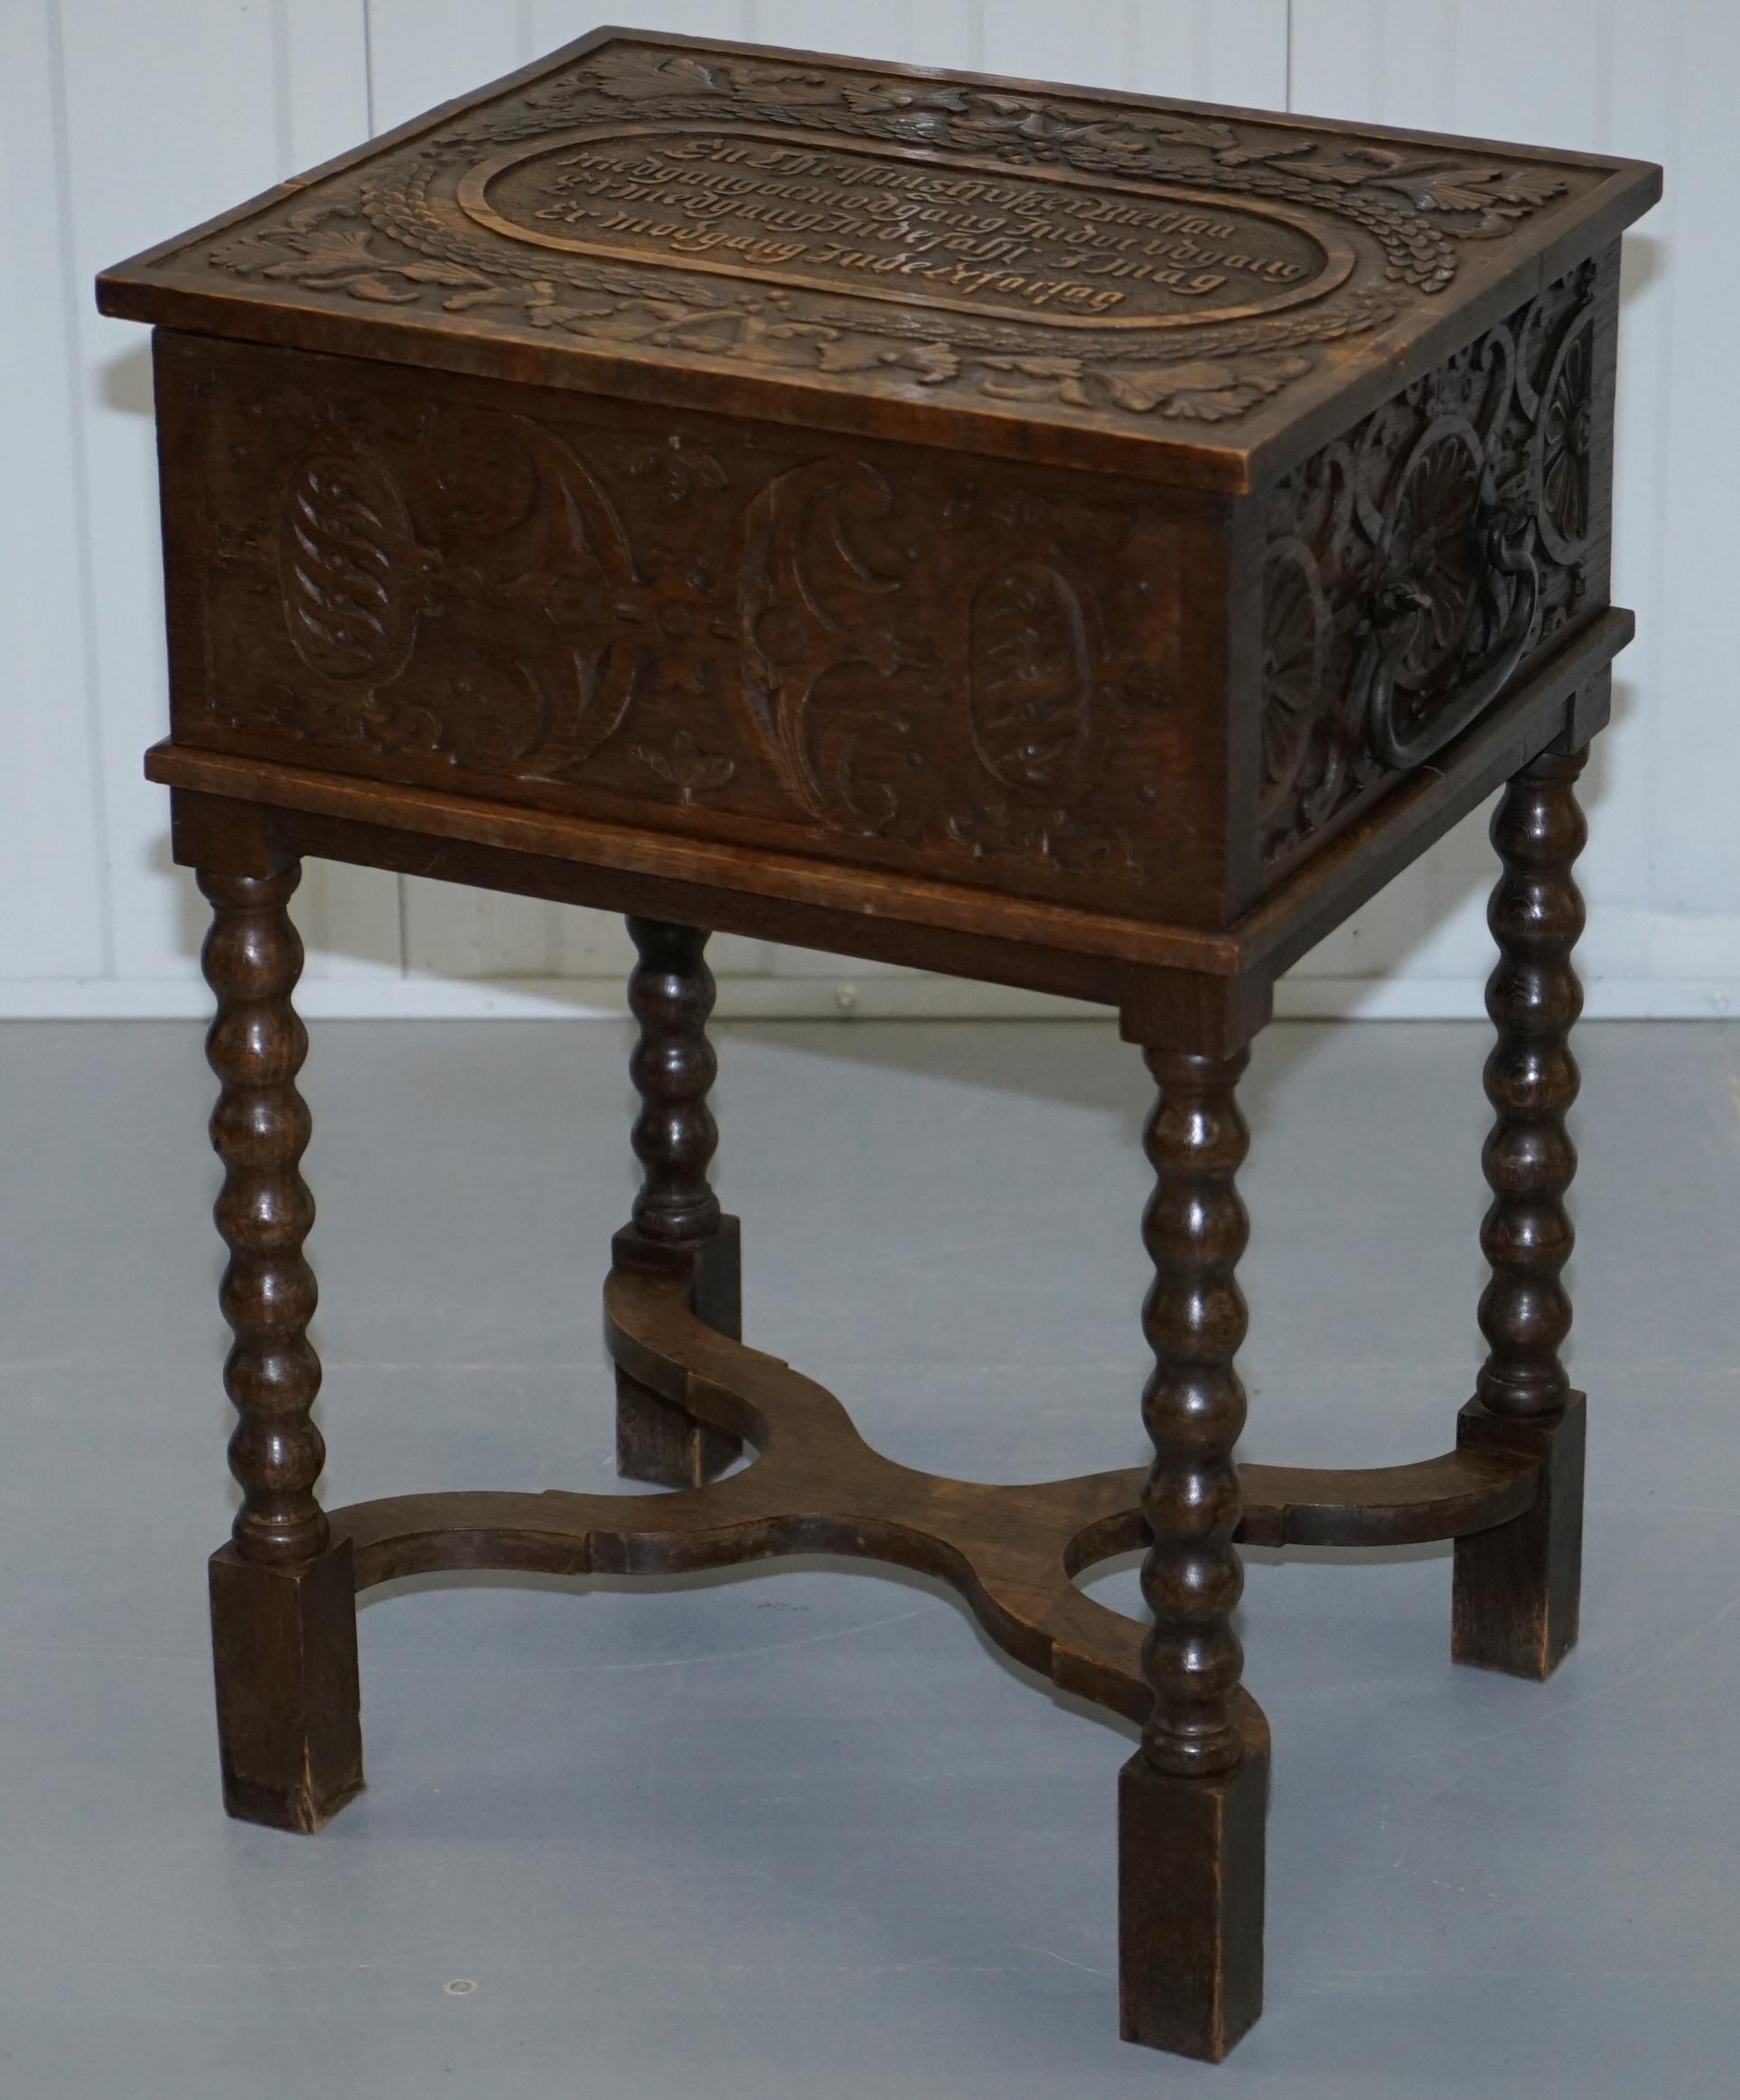 Jacobean Rare 17th Century Heavily Carved Box & Stand Danish Inscription, Marriage Chest